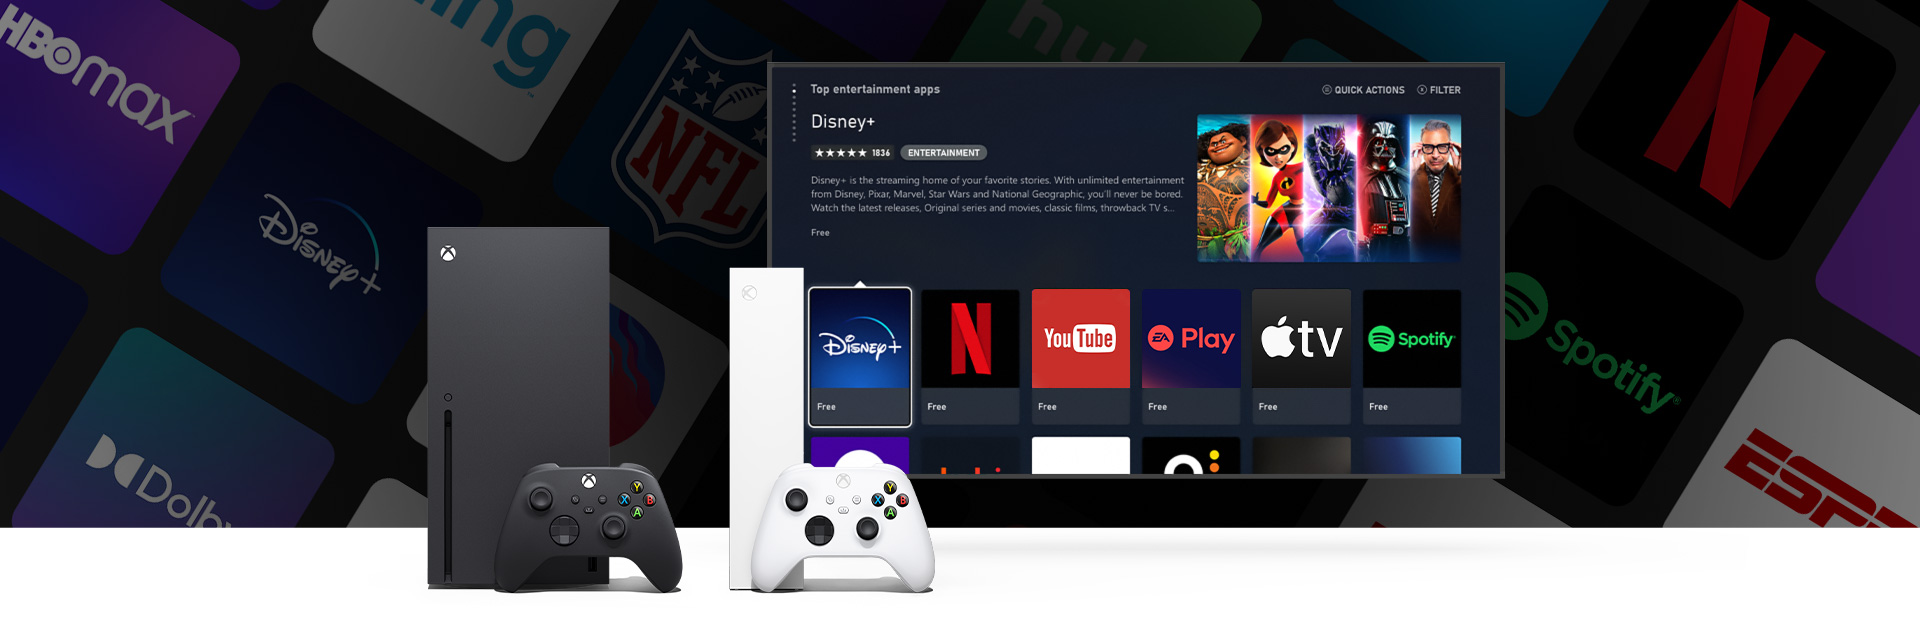 xbox one apps to watch free movies